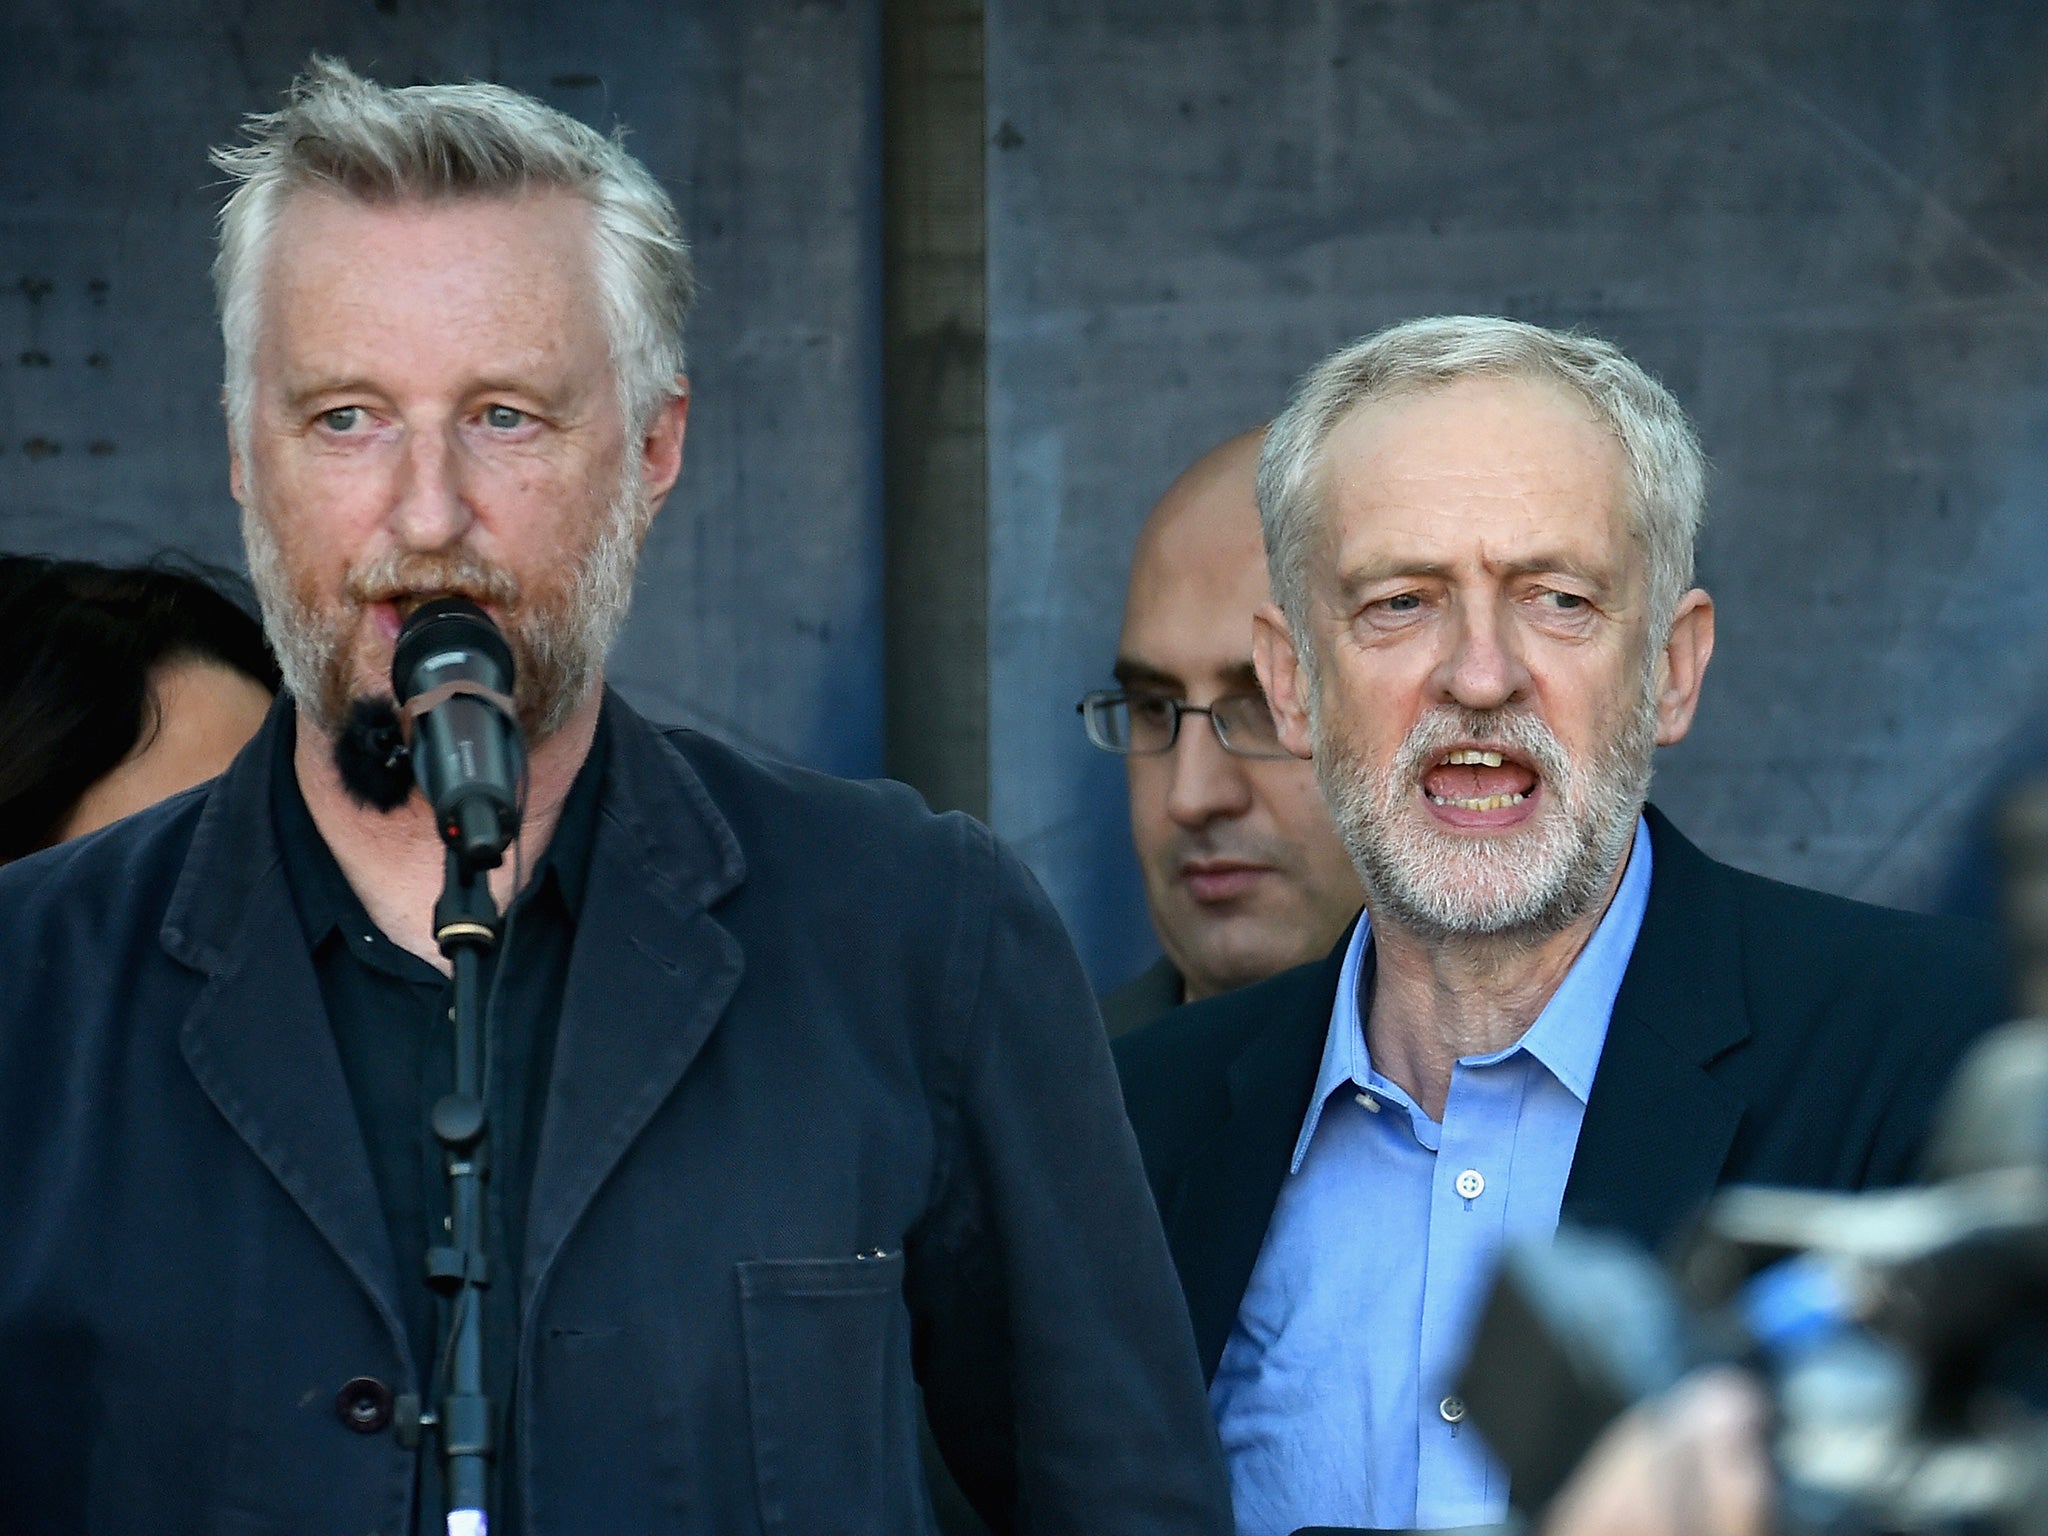 Billy Bragg was attacked by online trolls this week - after the facts were misrepresented as him pulling support from Corbyn